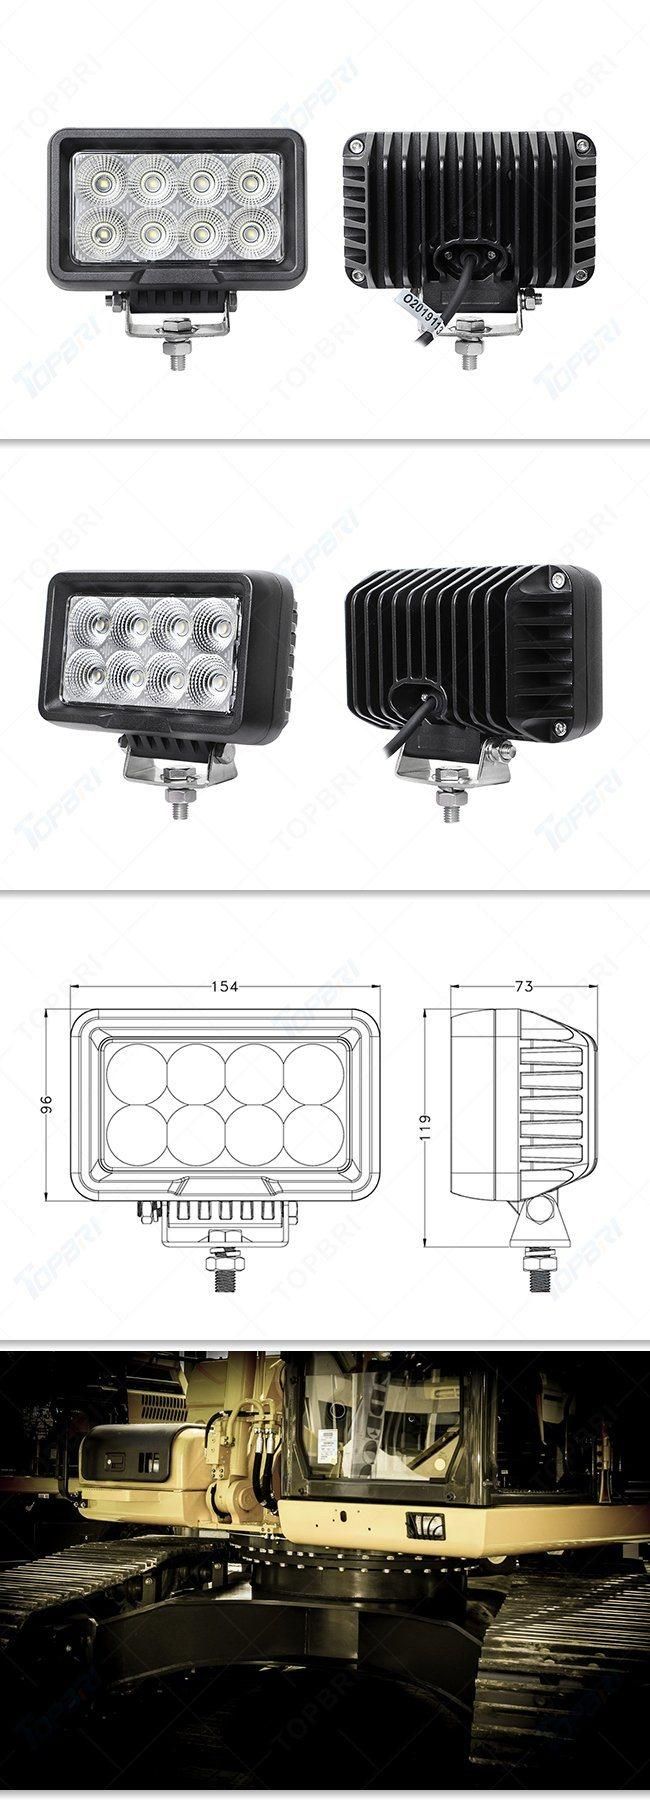 12V Car Light 80W LED Auto Work Working Lamps for Mining Head